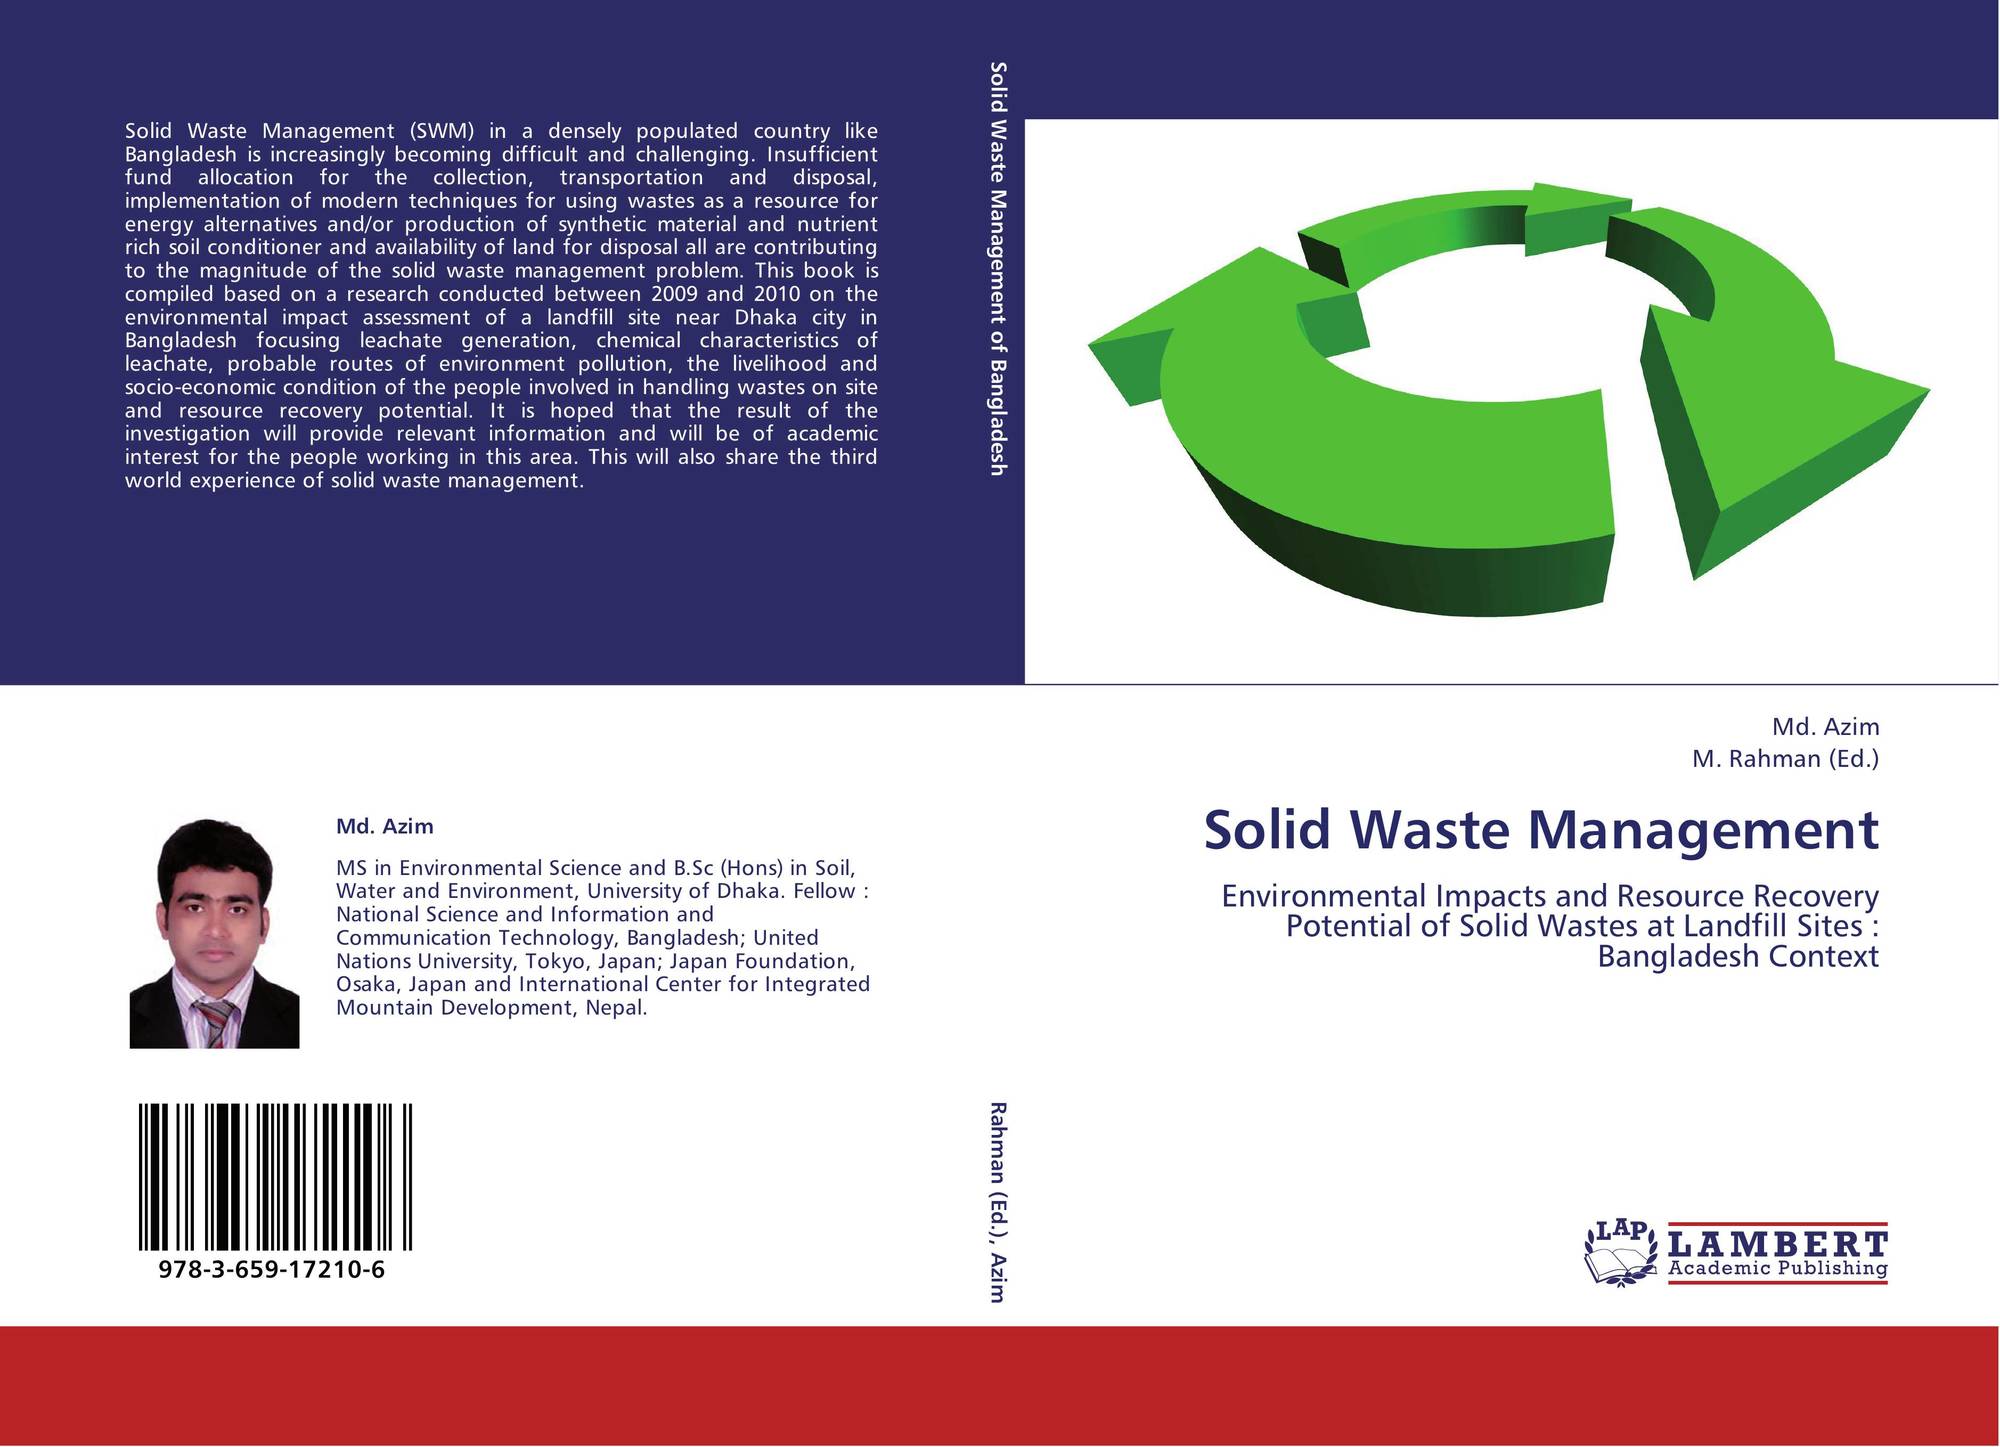 Solid Waste Management, 978-3-659-17210-6, 3659172103 ,9783659172106 by